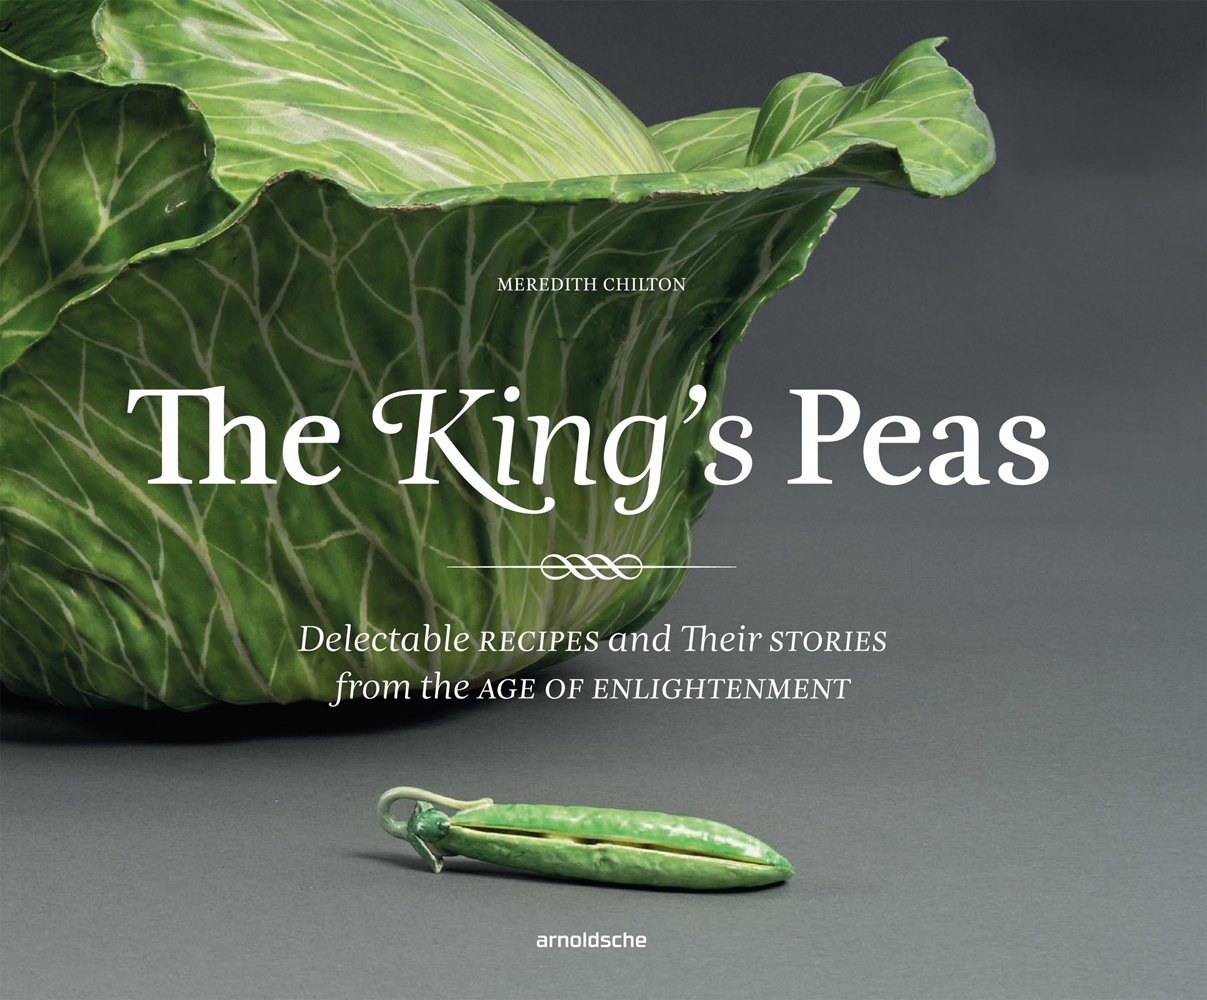 Delicate ceramic green cabbage with pea pod, grey cover, The King’s Peas in white font to centre.